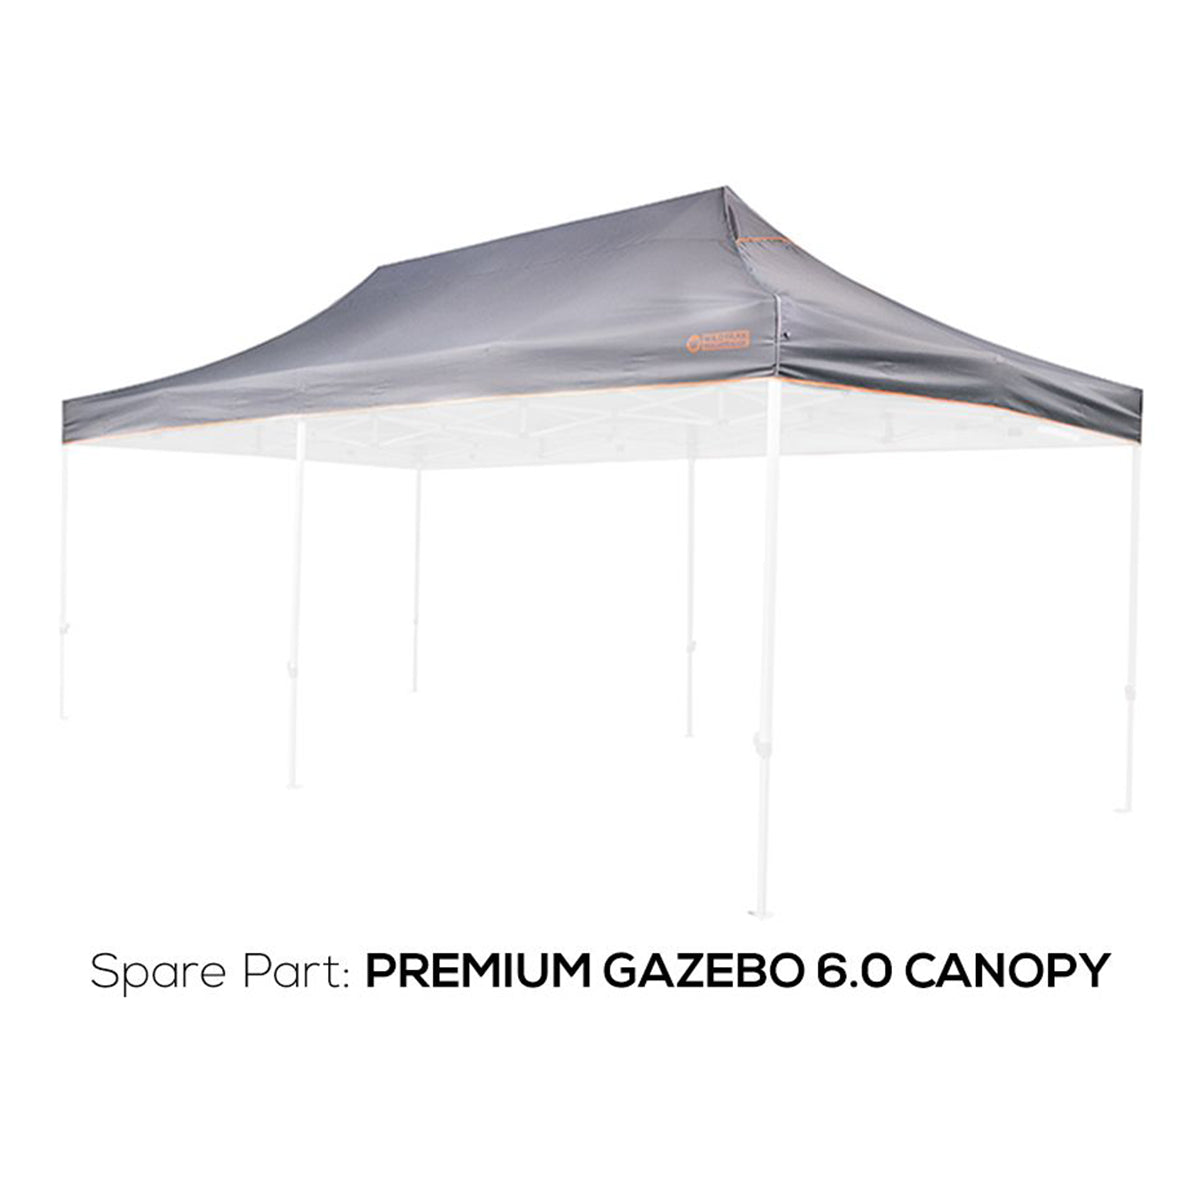 DELUXE GAZEBO 6.0 CANOPY REPLACEMENT